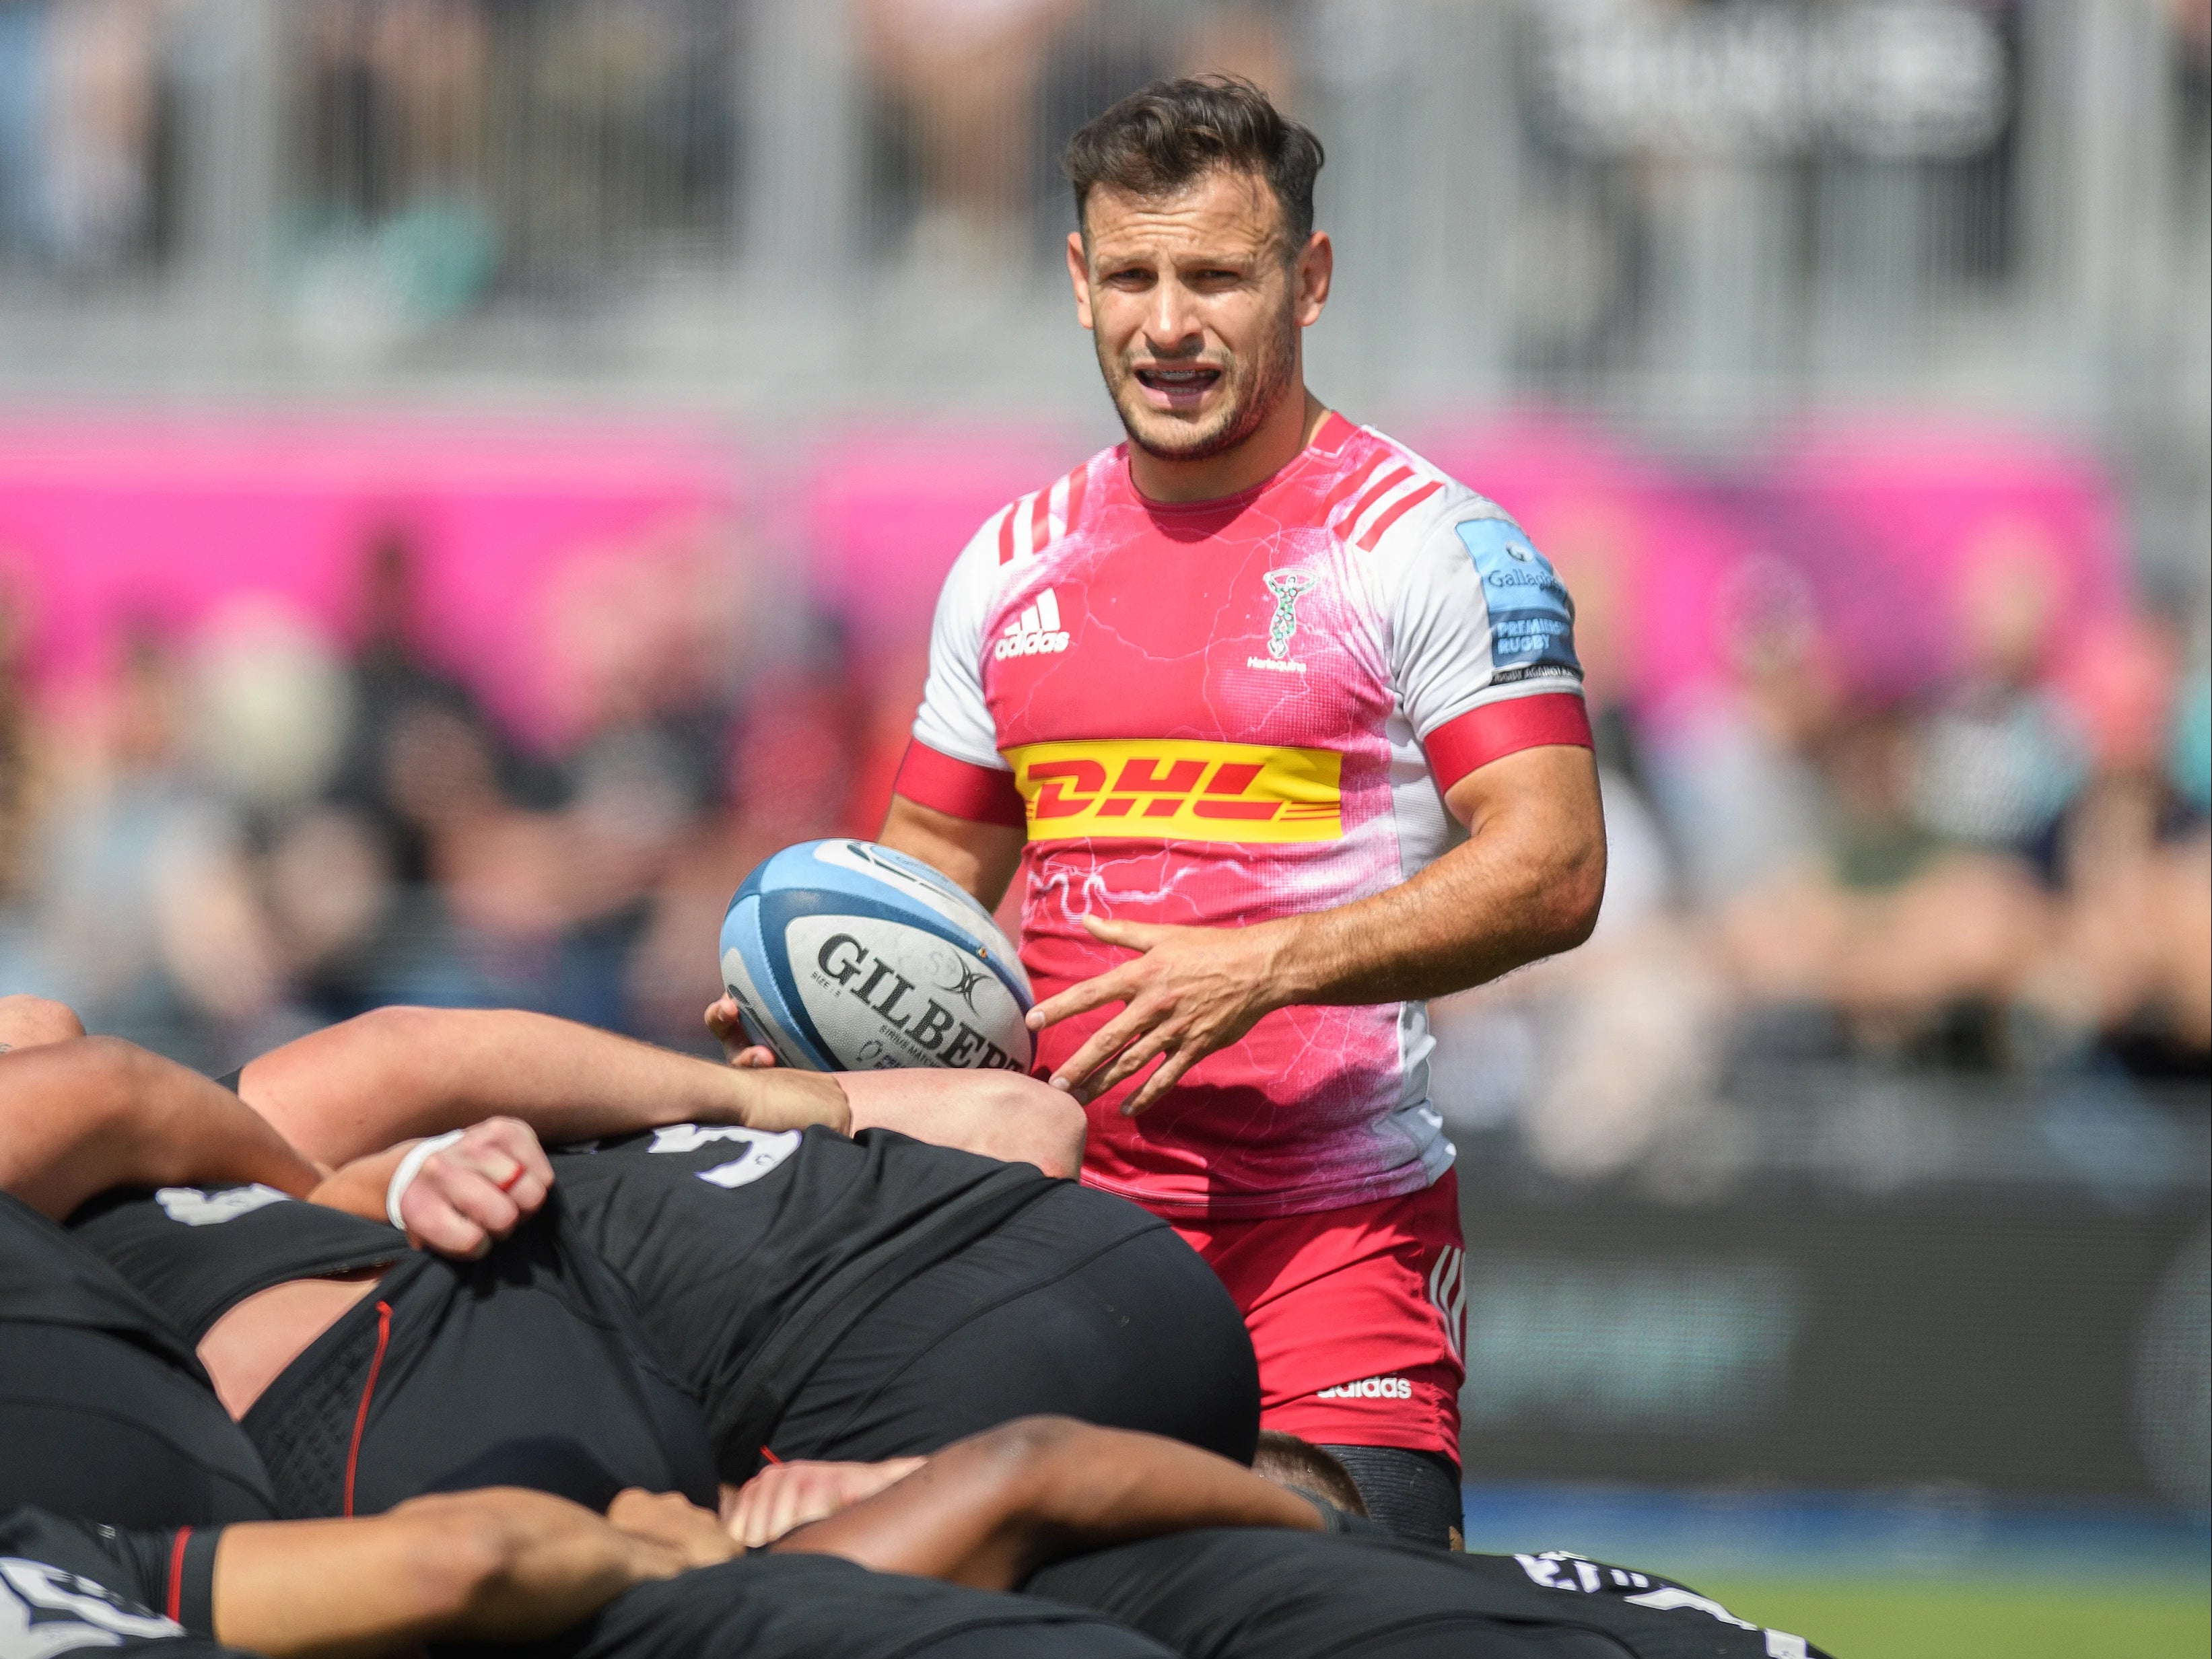 Danny Care’s stunning form for Harlequins has earned him an England recall